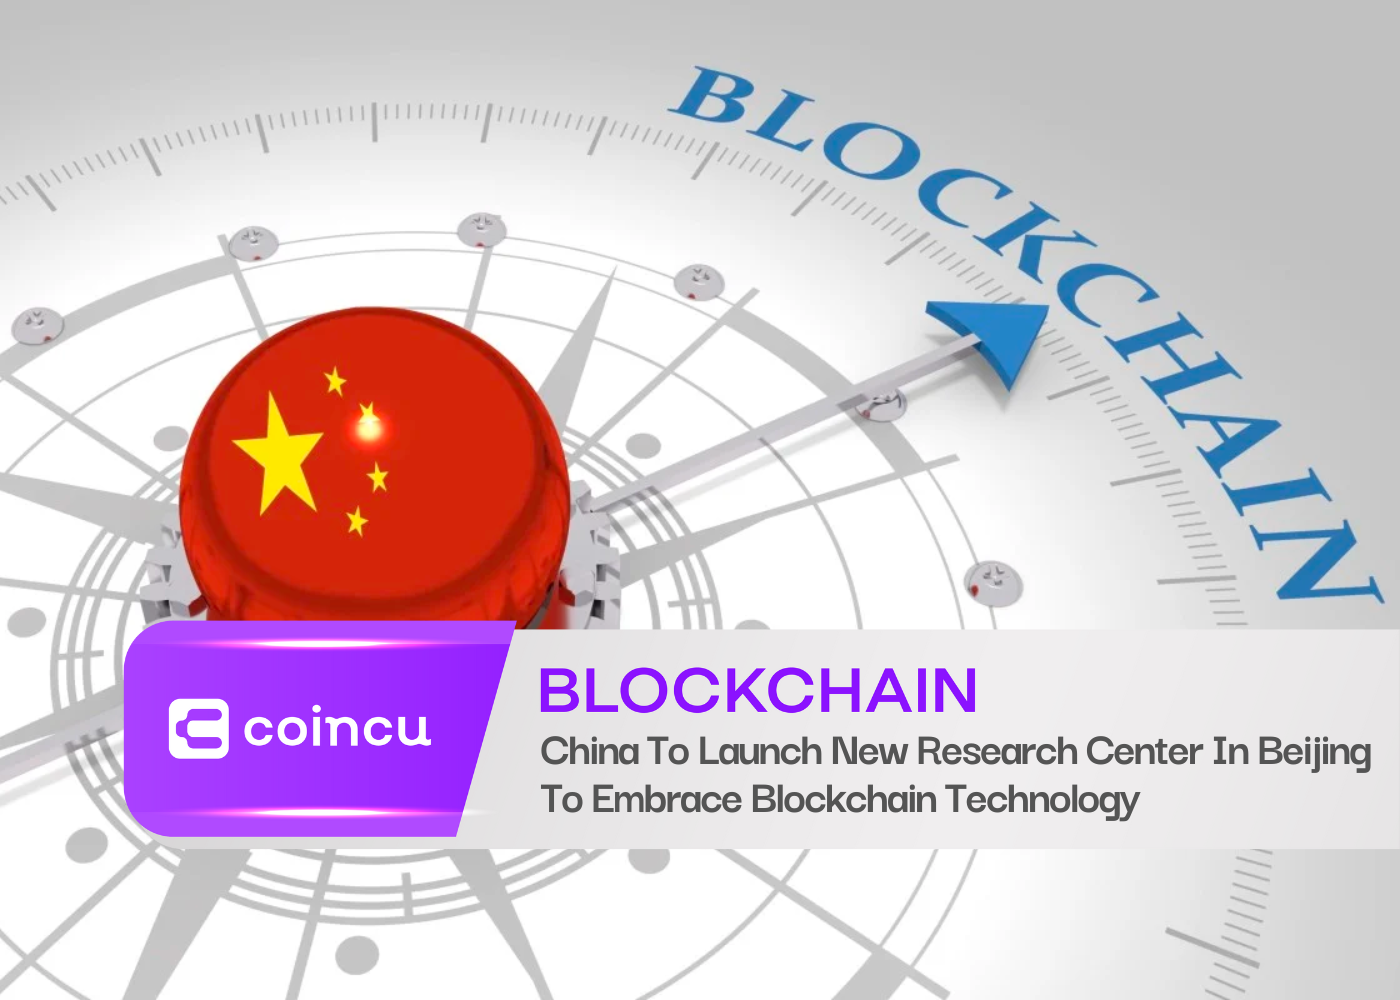 China To Launch New Research Center In Beijing To Embrace Blockchain Technology